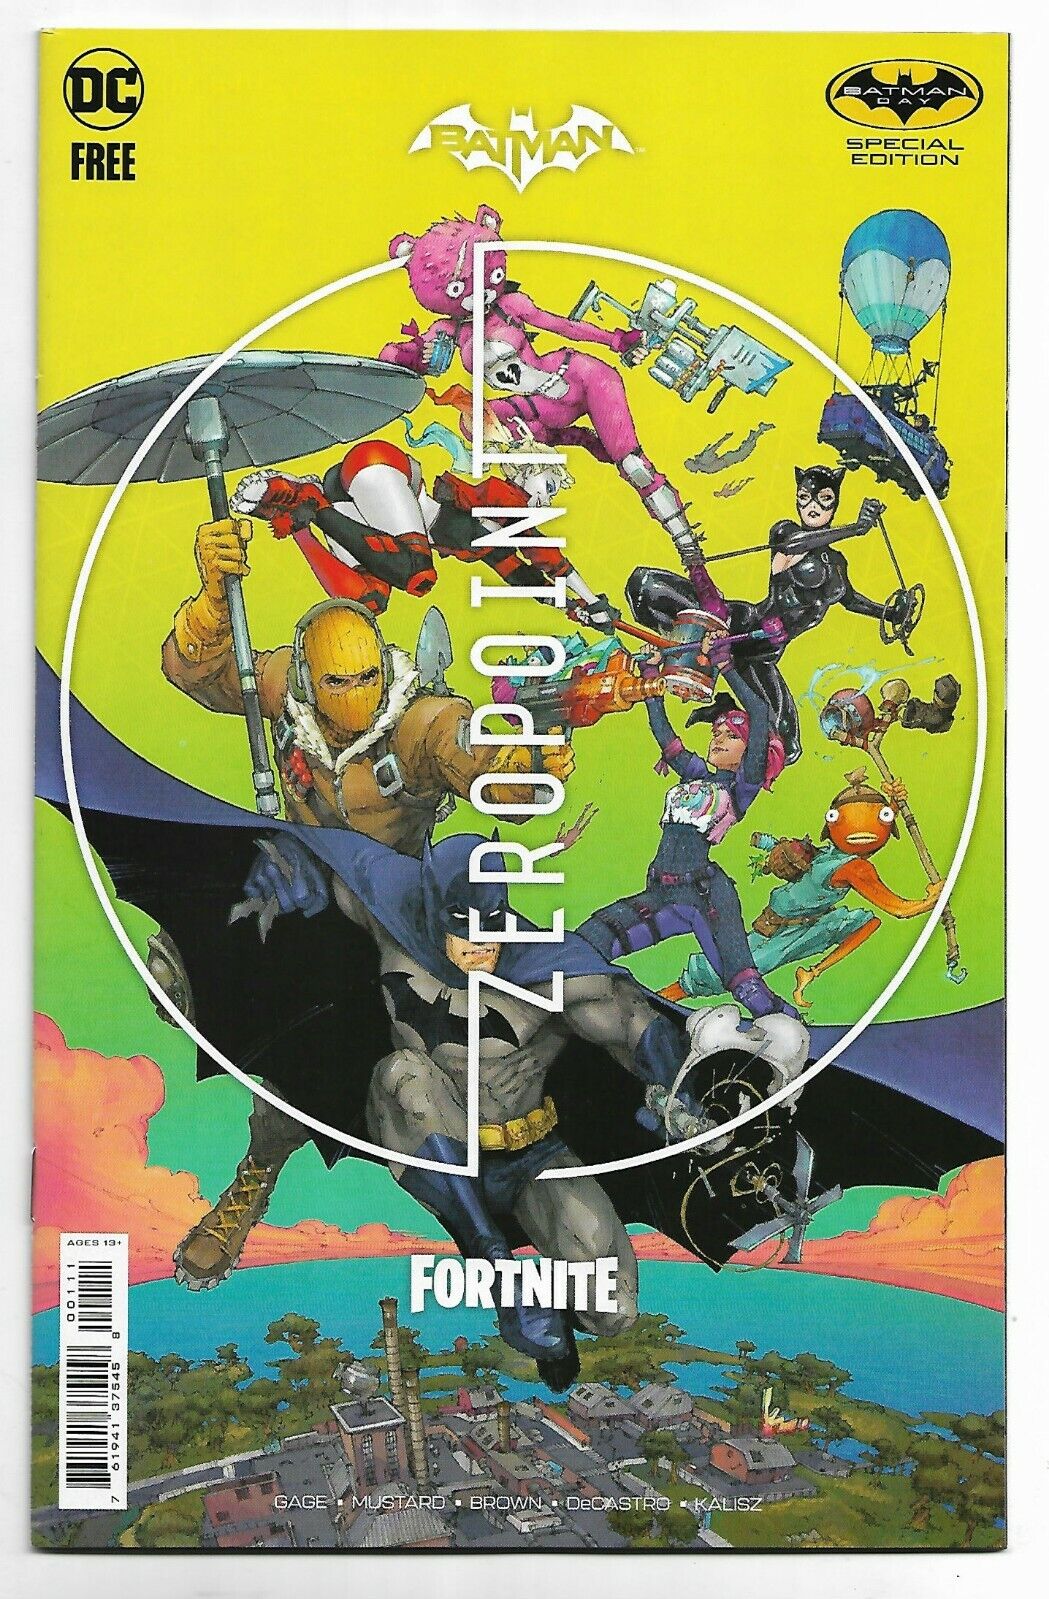 Zero Point Fortnite #1 Free Comic Book Day Batman Special Edition Variant